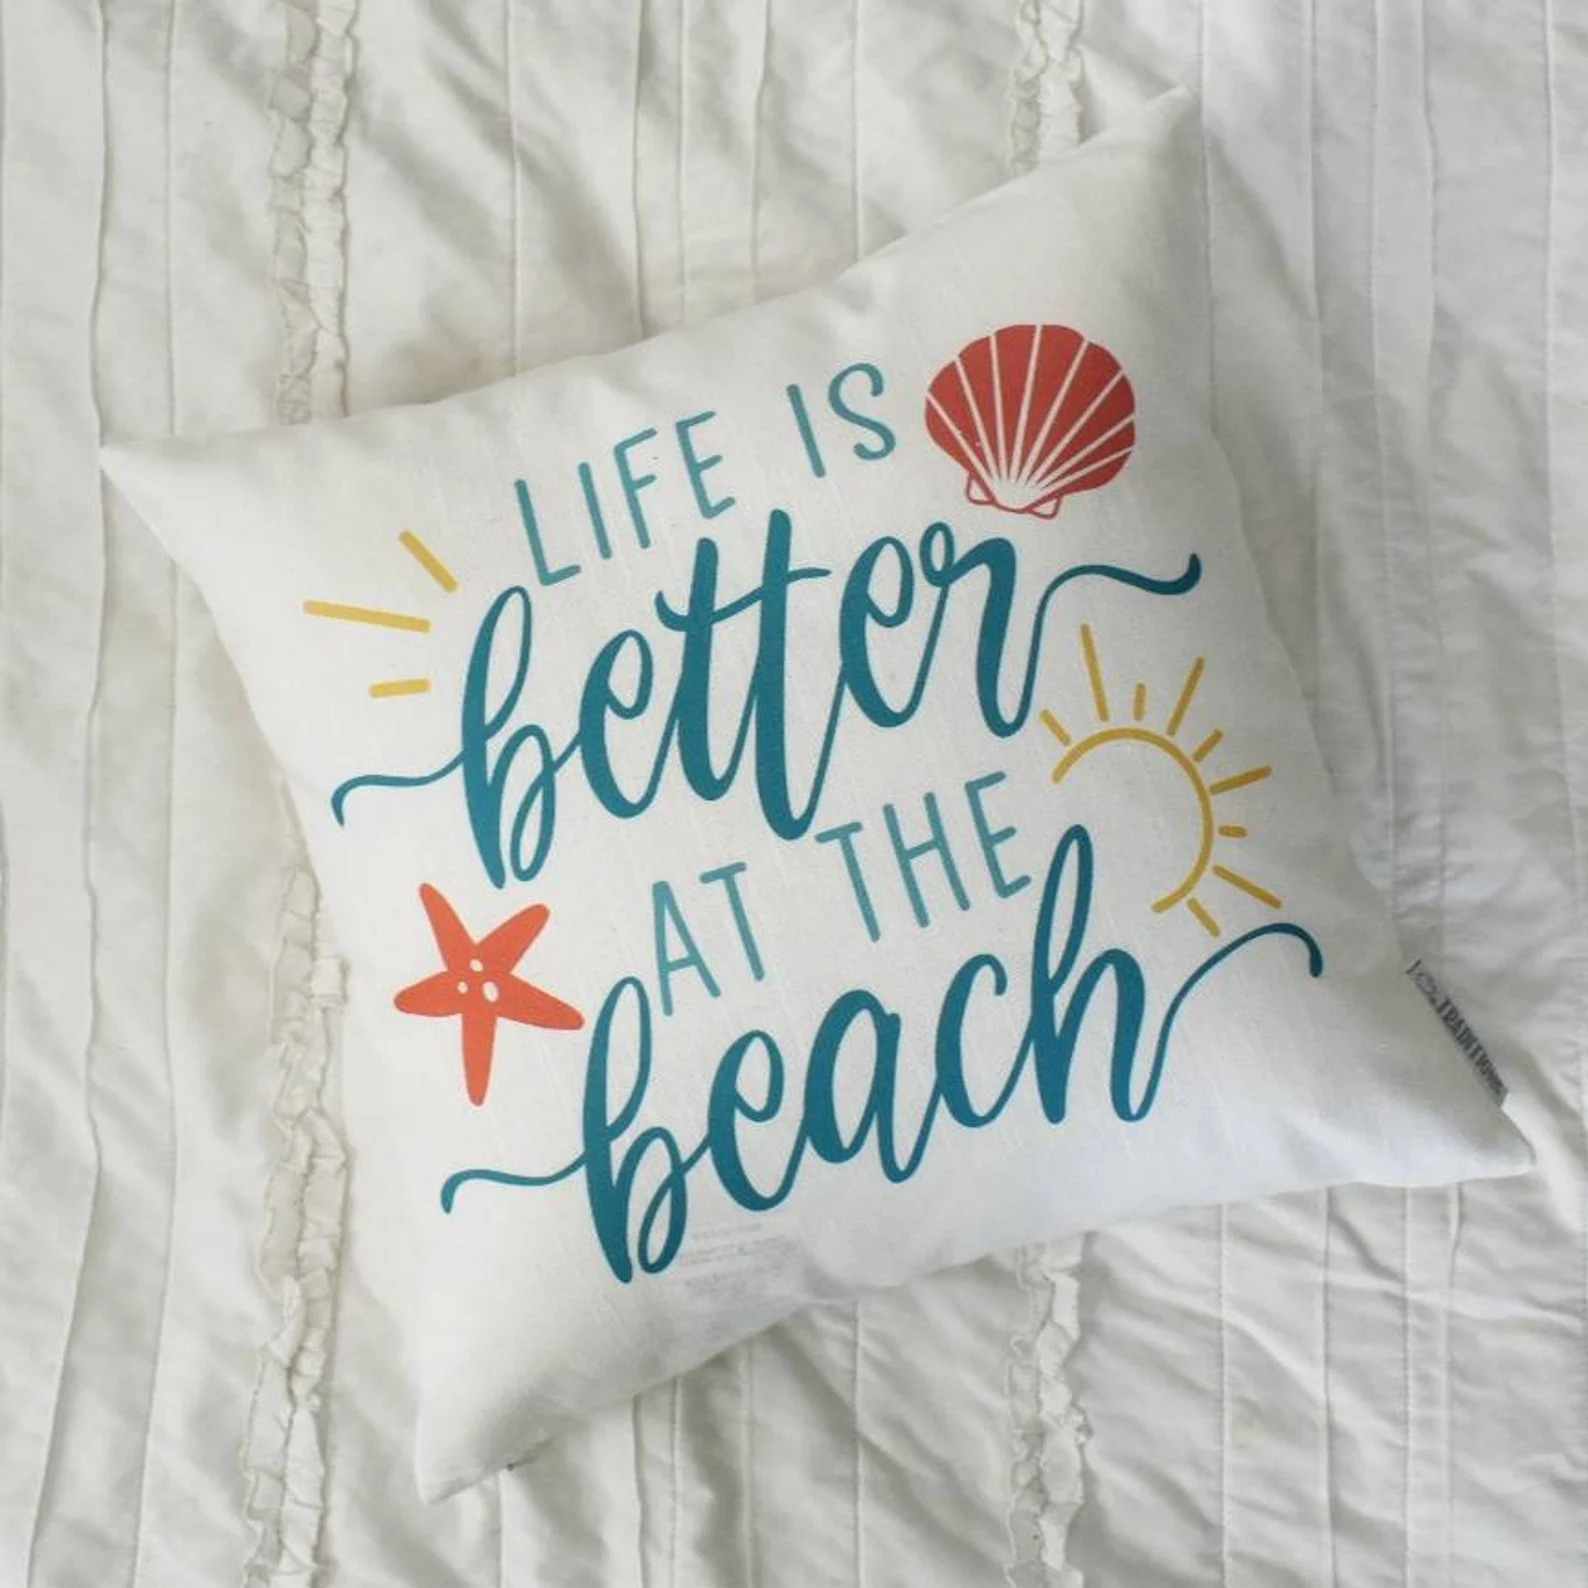 14 Fantastic Summer Pillow Designs That Will Bring The Sunshine To Your Home